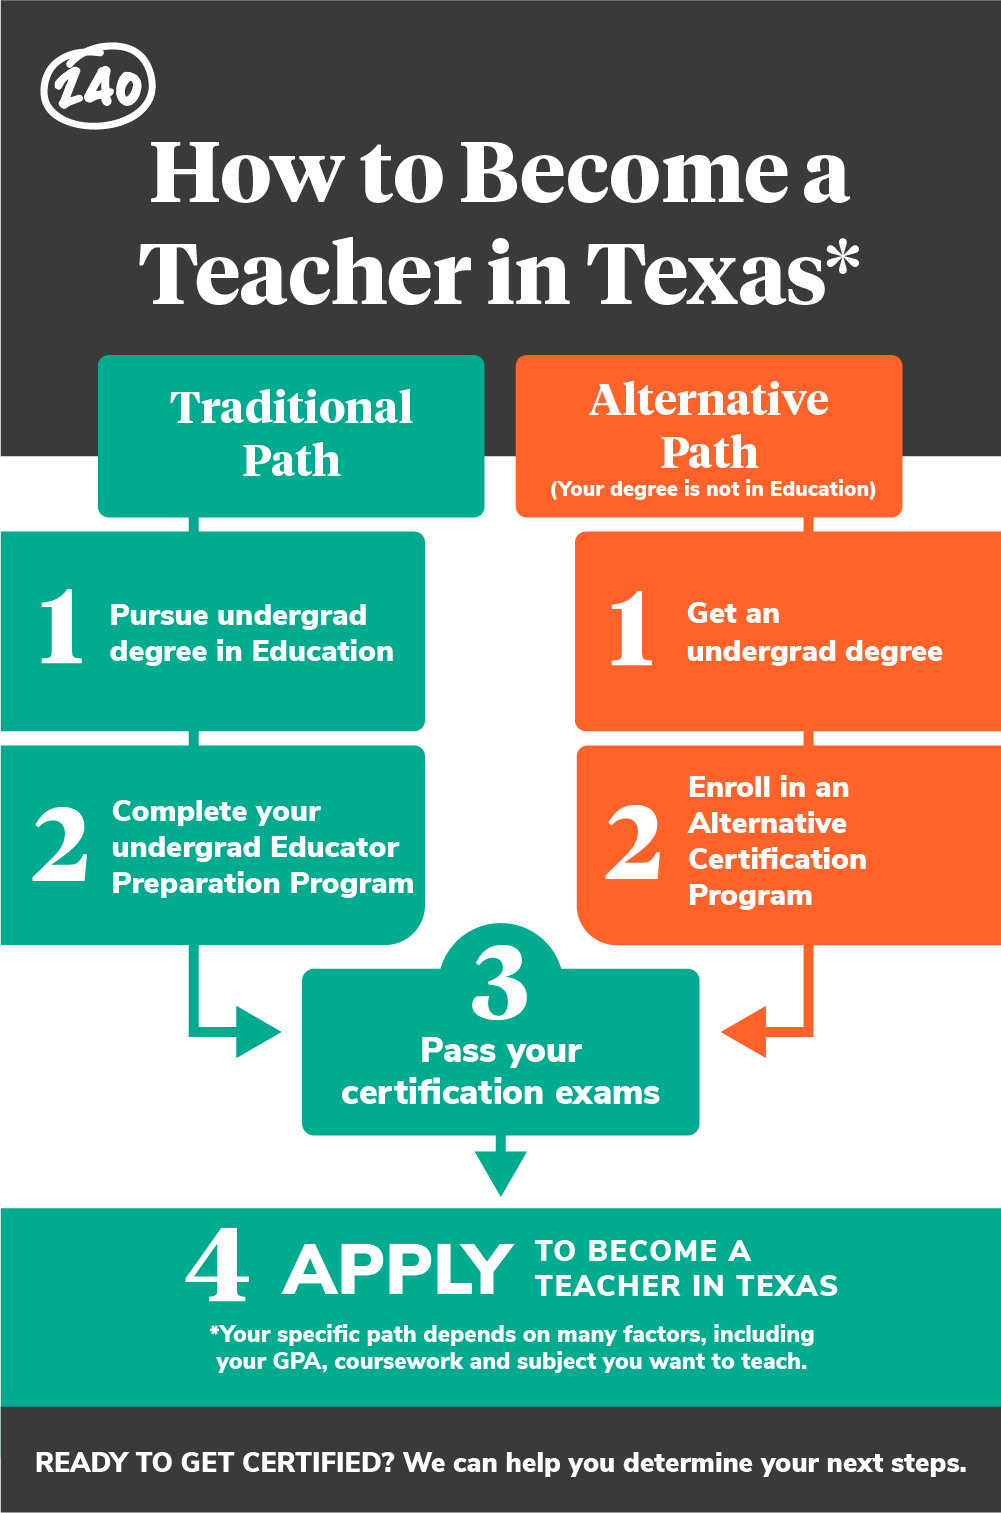 How to Become a Teacher in Texas Infographic